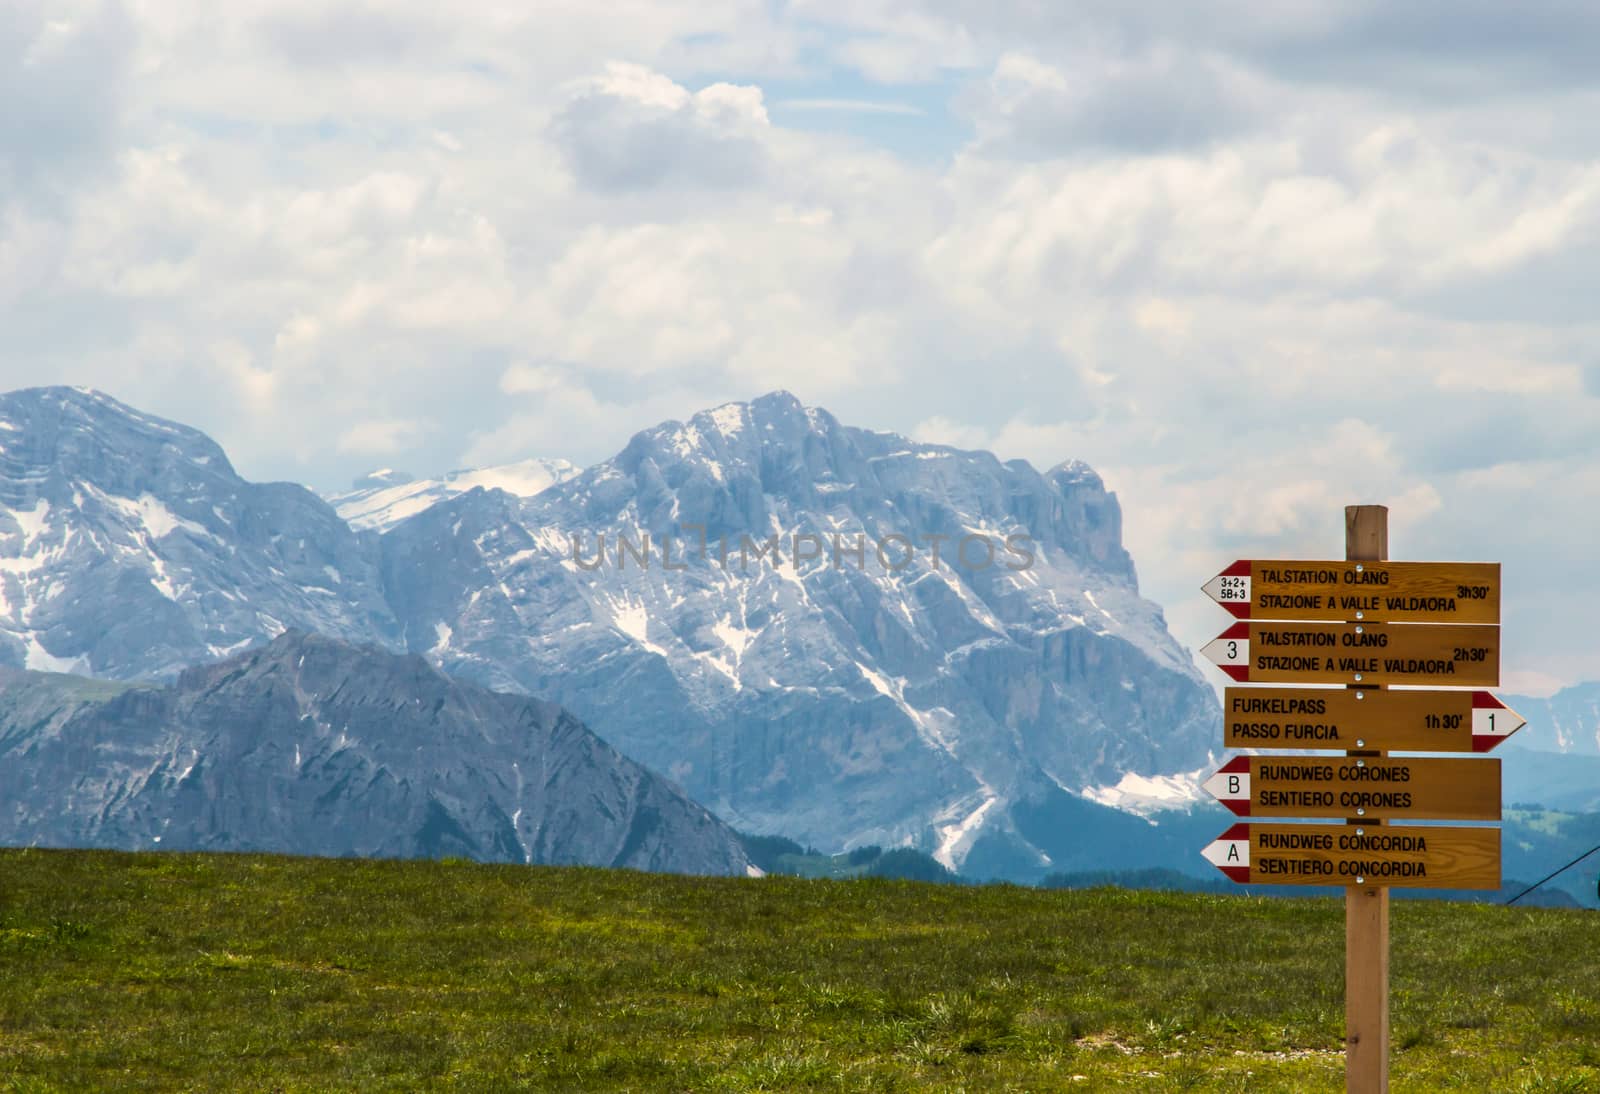 Alpine meadow with wooden signage. by Isaac74